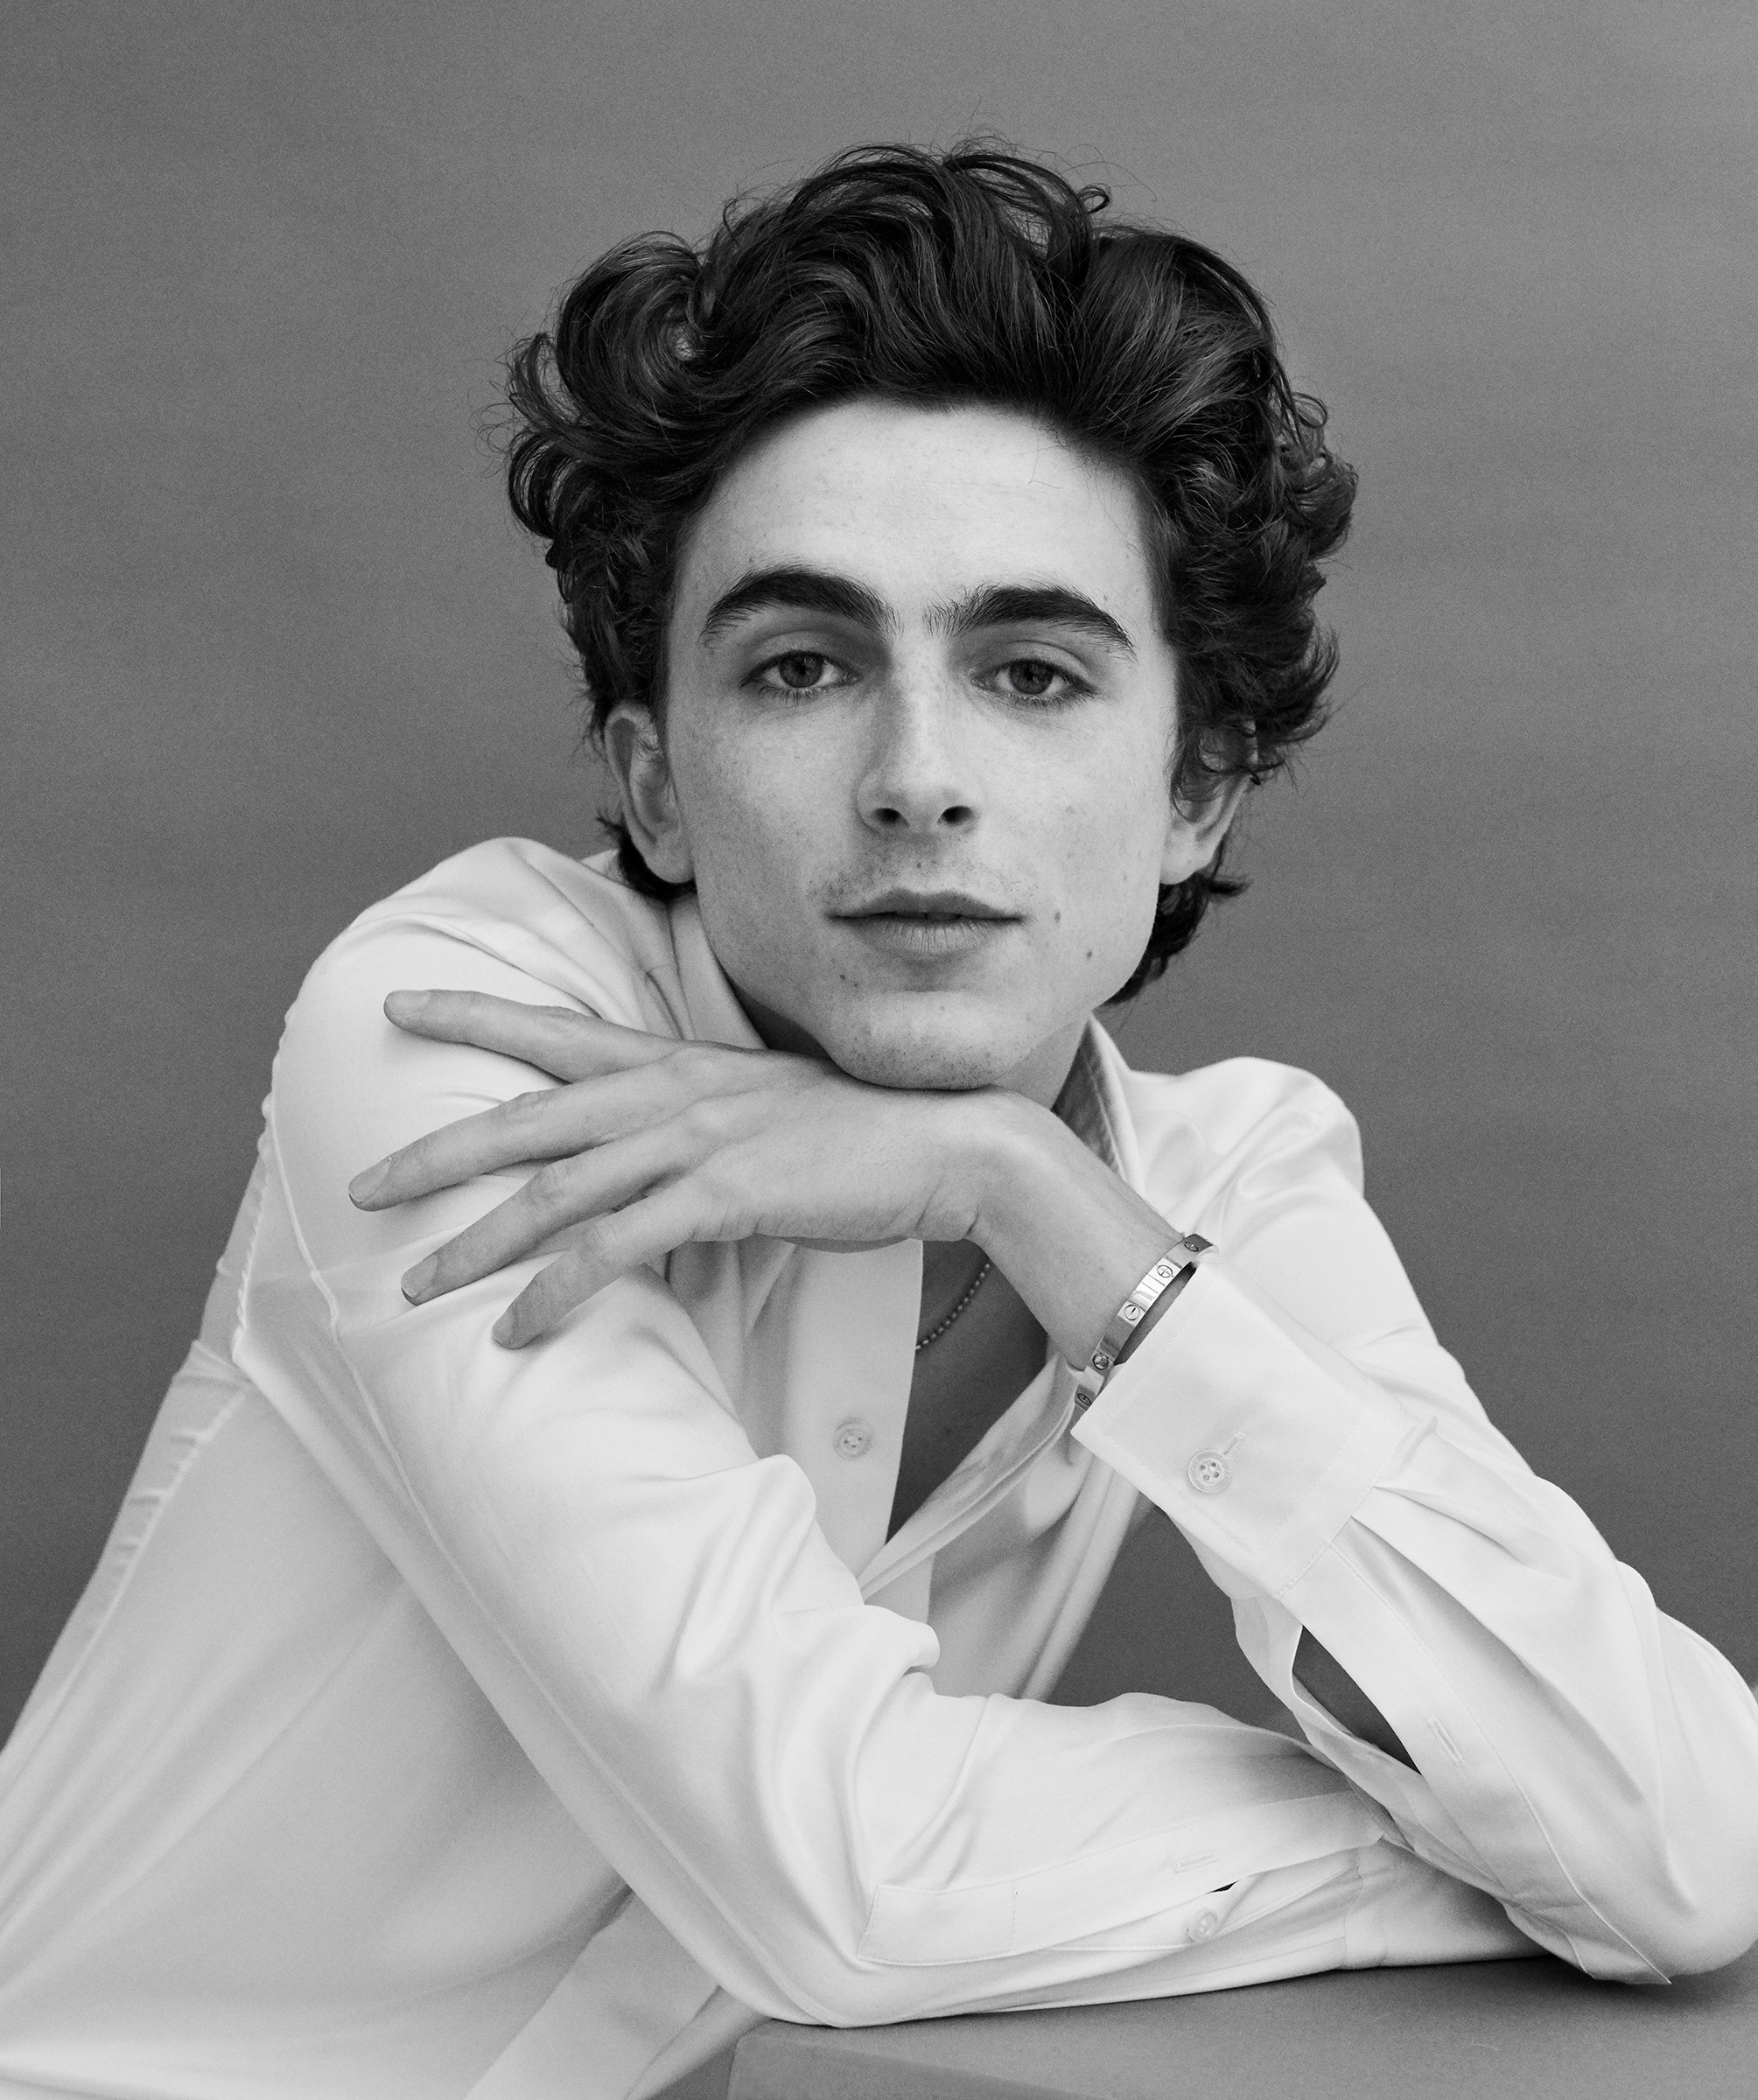 <strong>Timothée Chalamet</strong>. "<a href="https://time.com/6103203/timothee-chalamet-profile/">Next Generation Leaders</a>," Oct. 25 issue. (Ruvén Afanador for TIME)